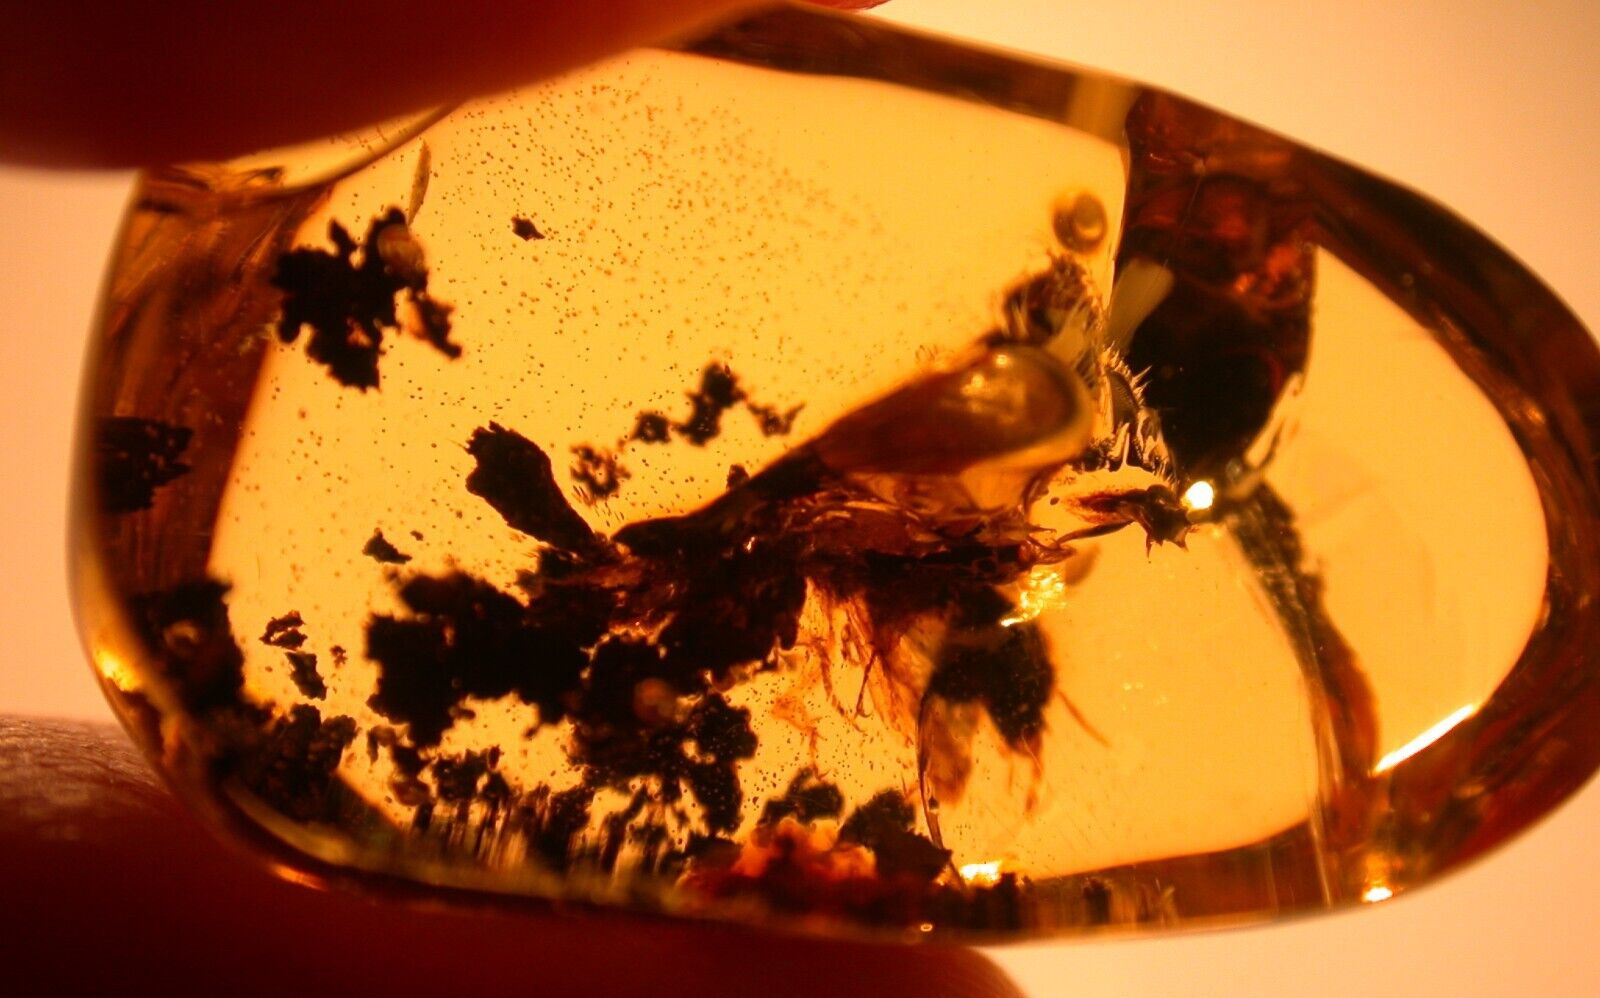 Large Termite with Ancient Methane Bubble in Dominican Amber Fossil Gemstone